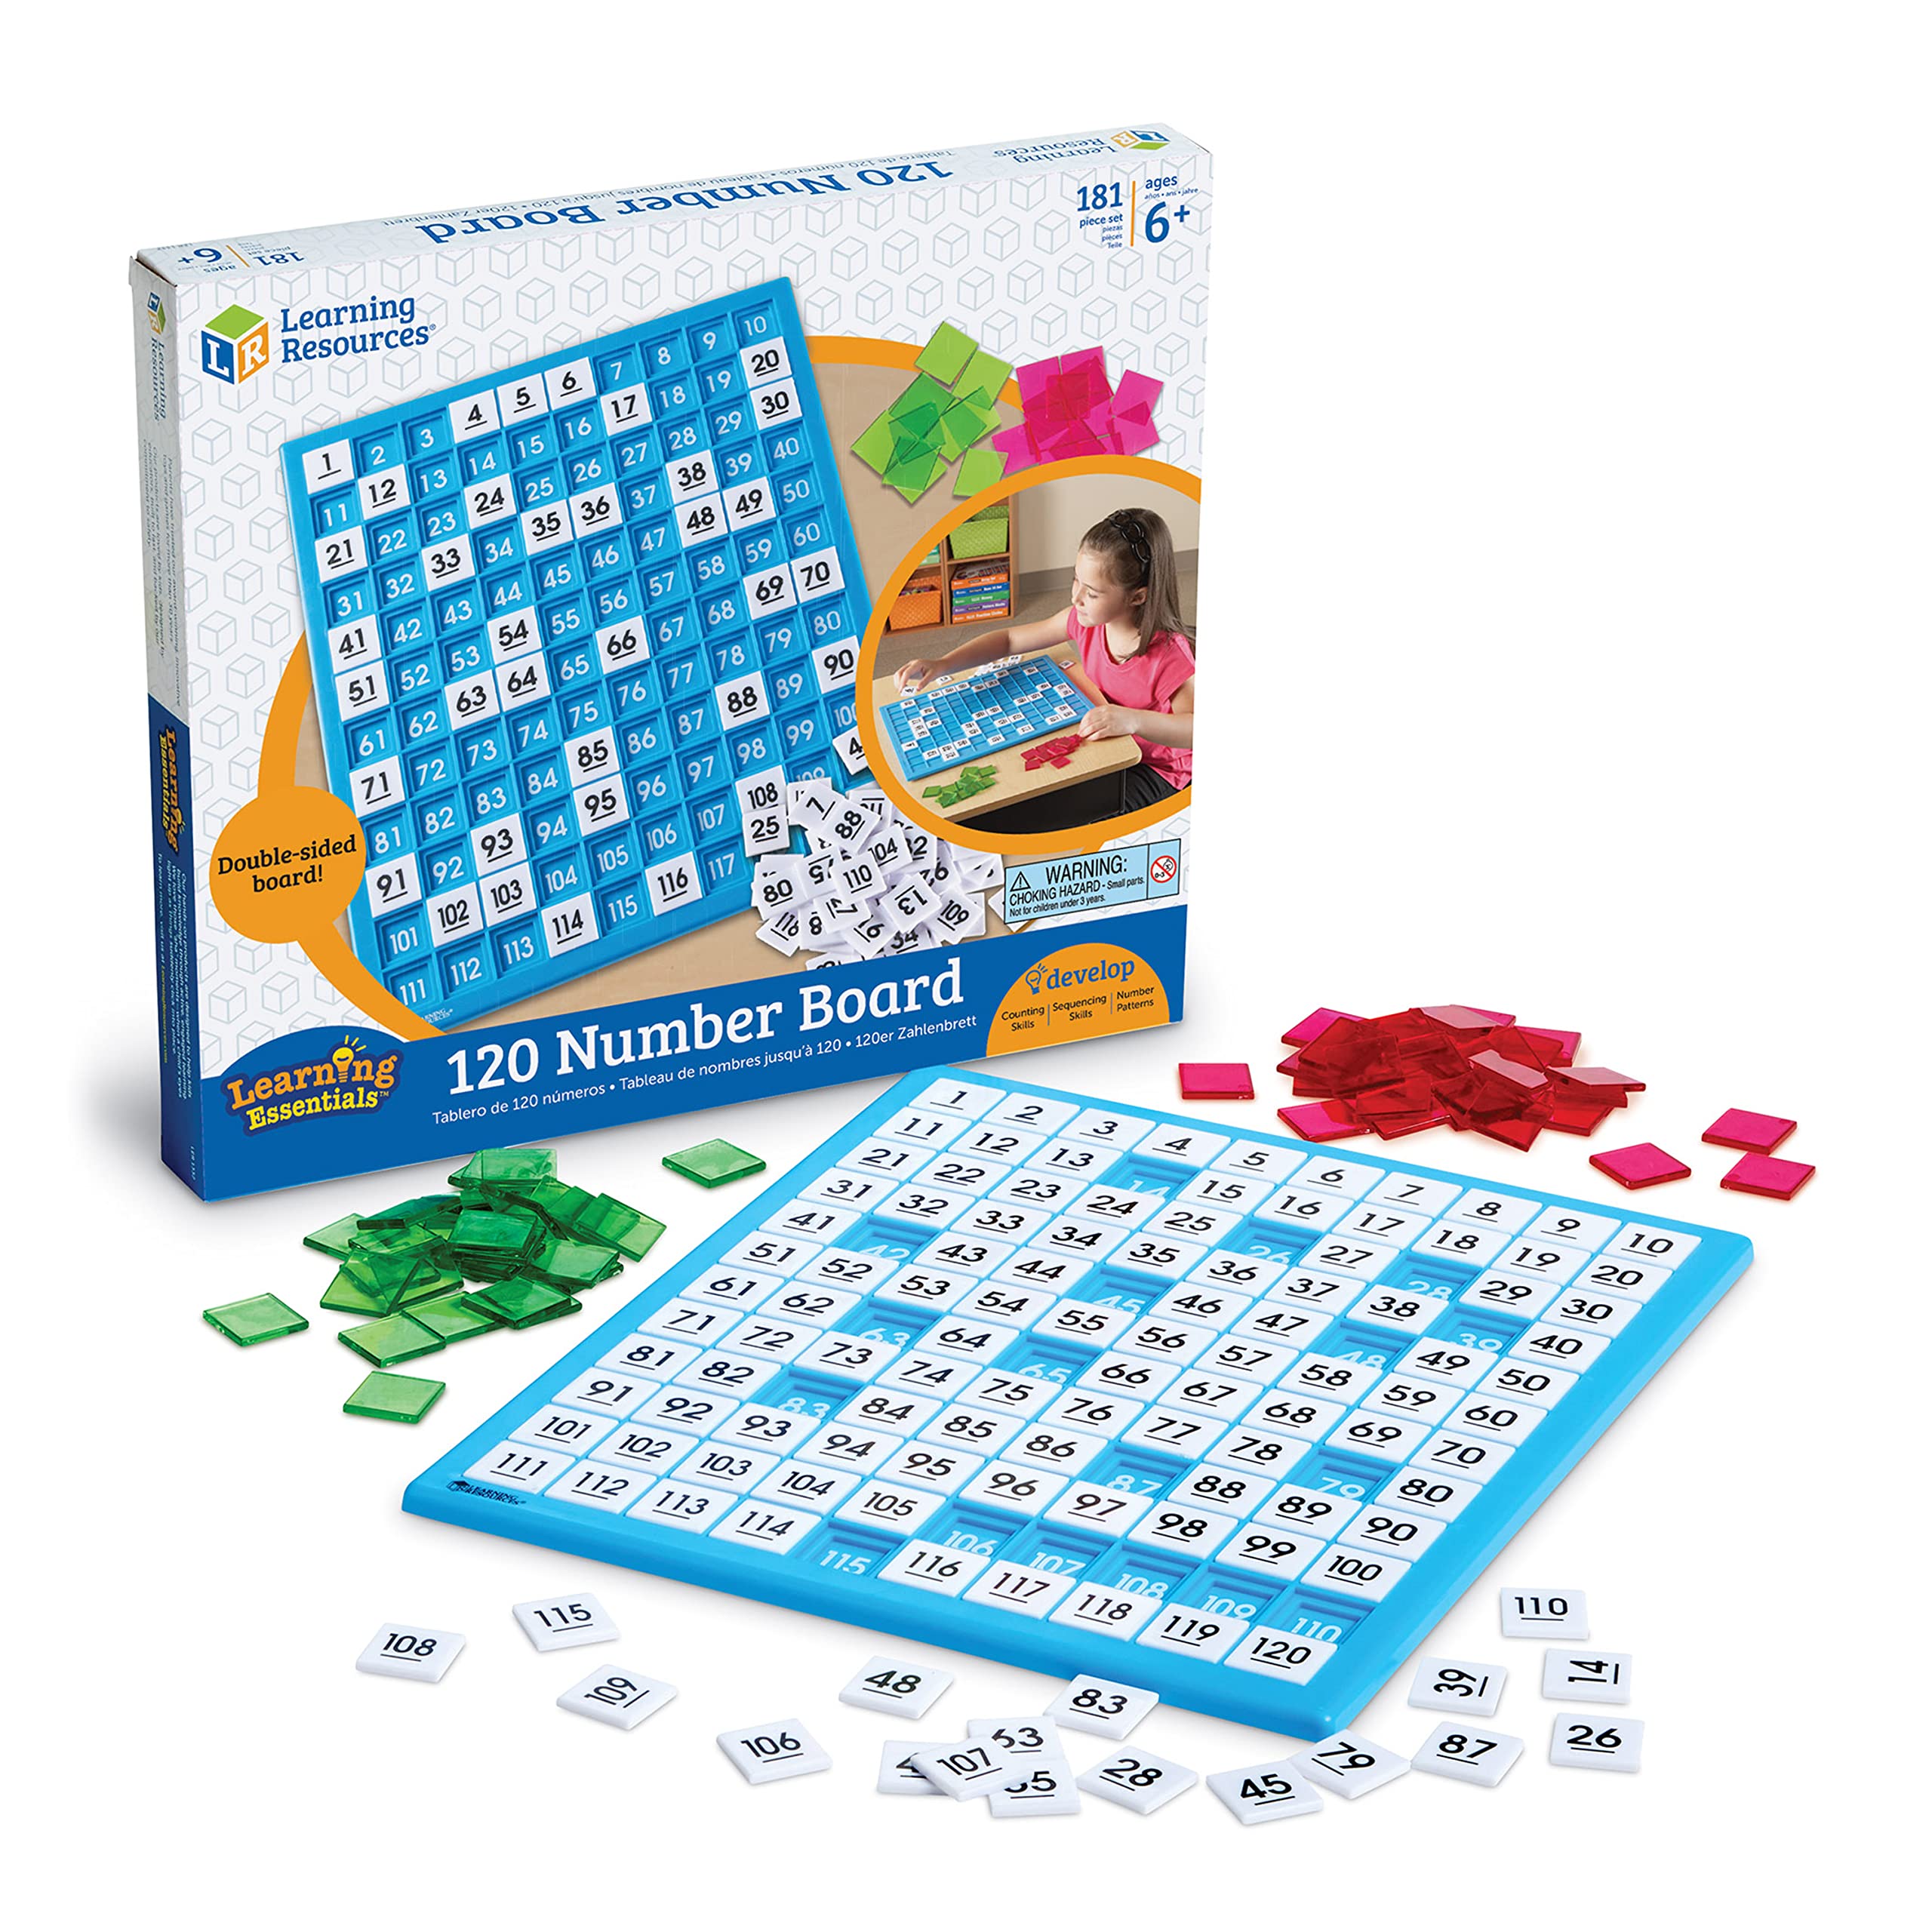 Learning Resources 120 Number Board -181 Pieces, Ages 6+ Learning Math games for Kids, Educational and Fun games for Kids